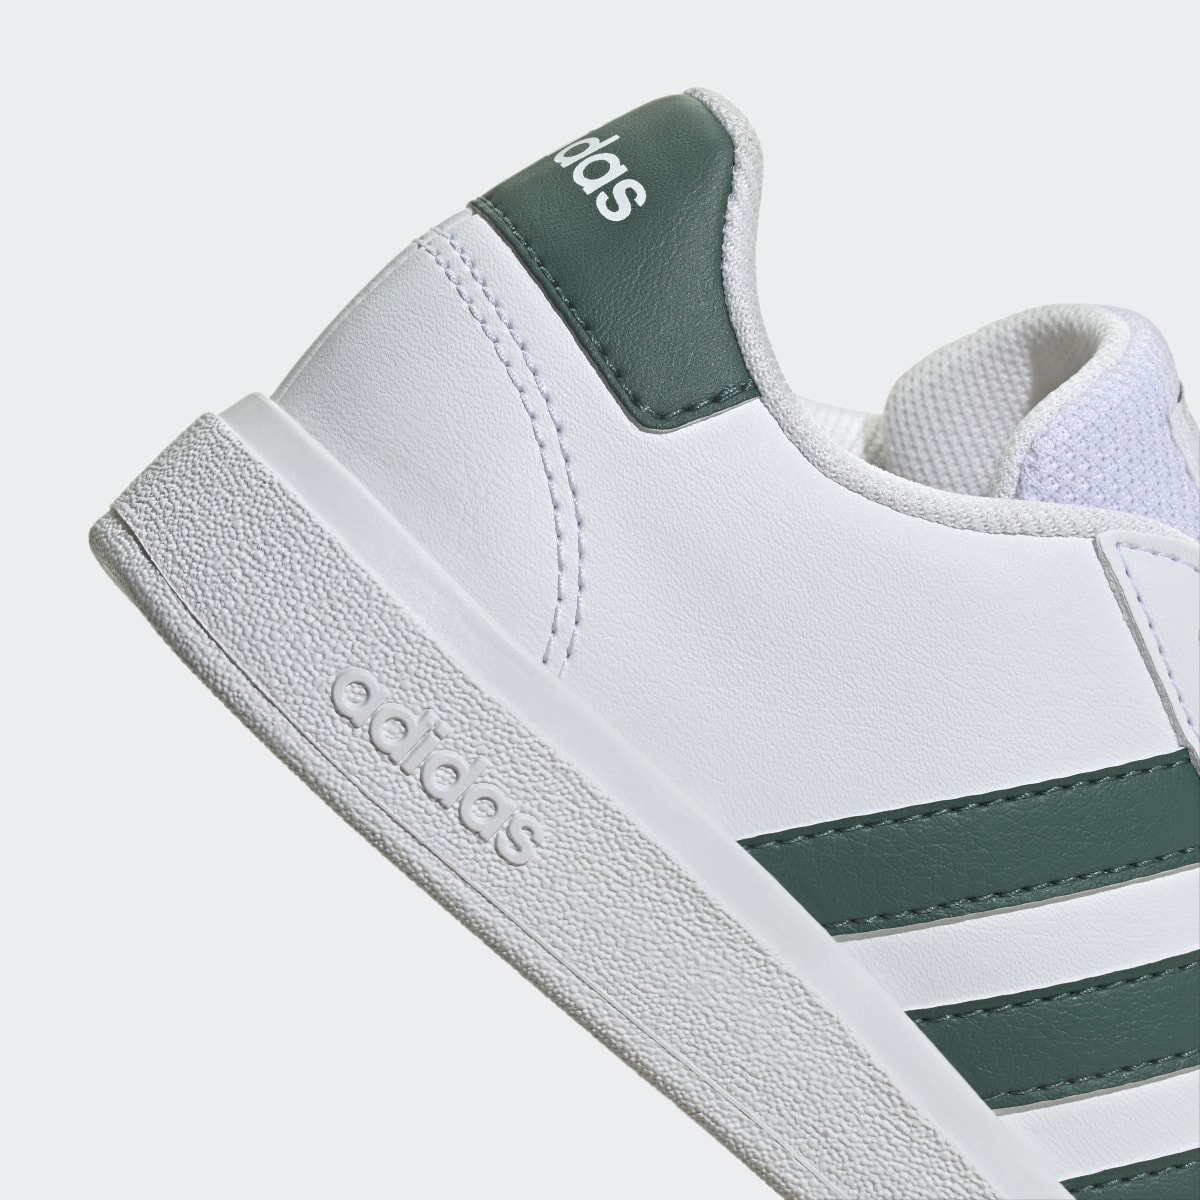 Adidas Grand Court Lifestyle Tennis Lace-Up Schuh. 10